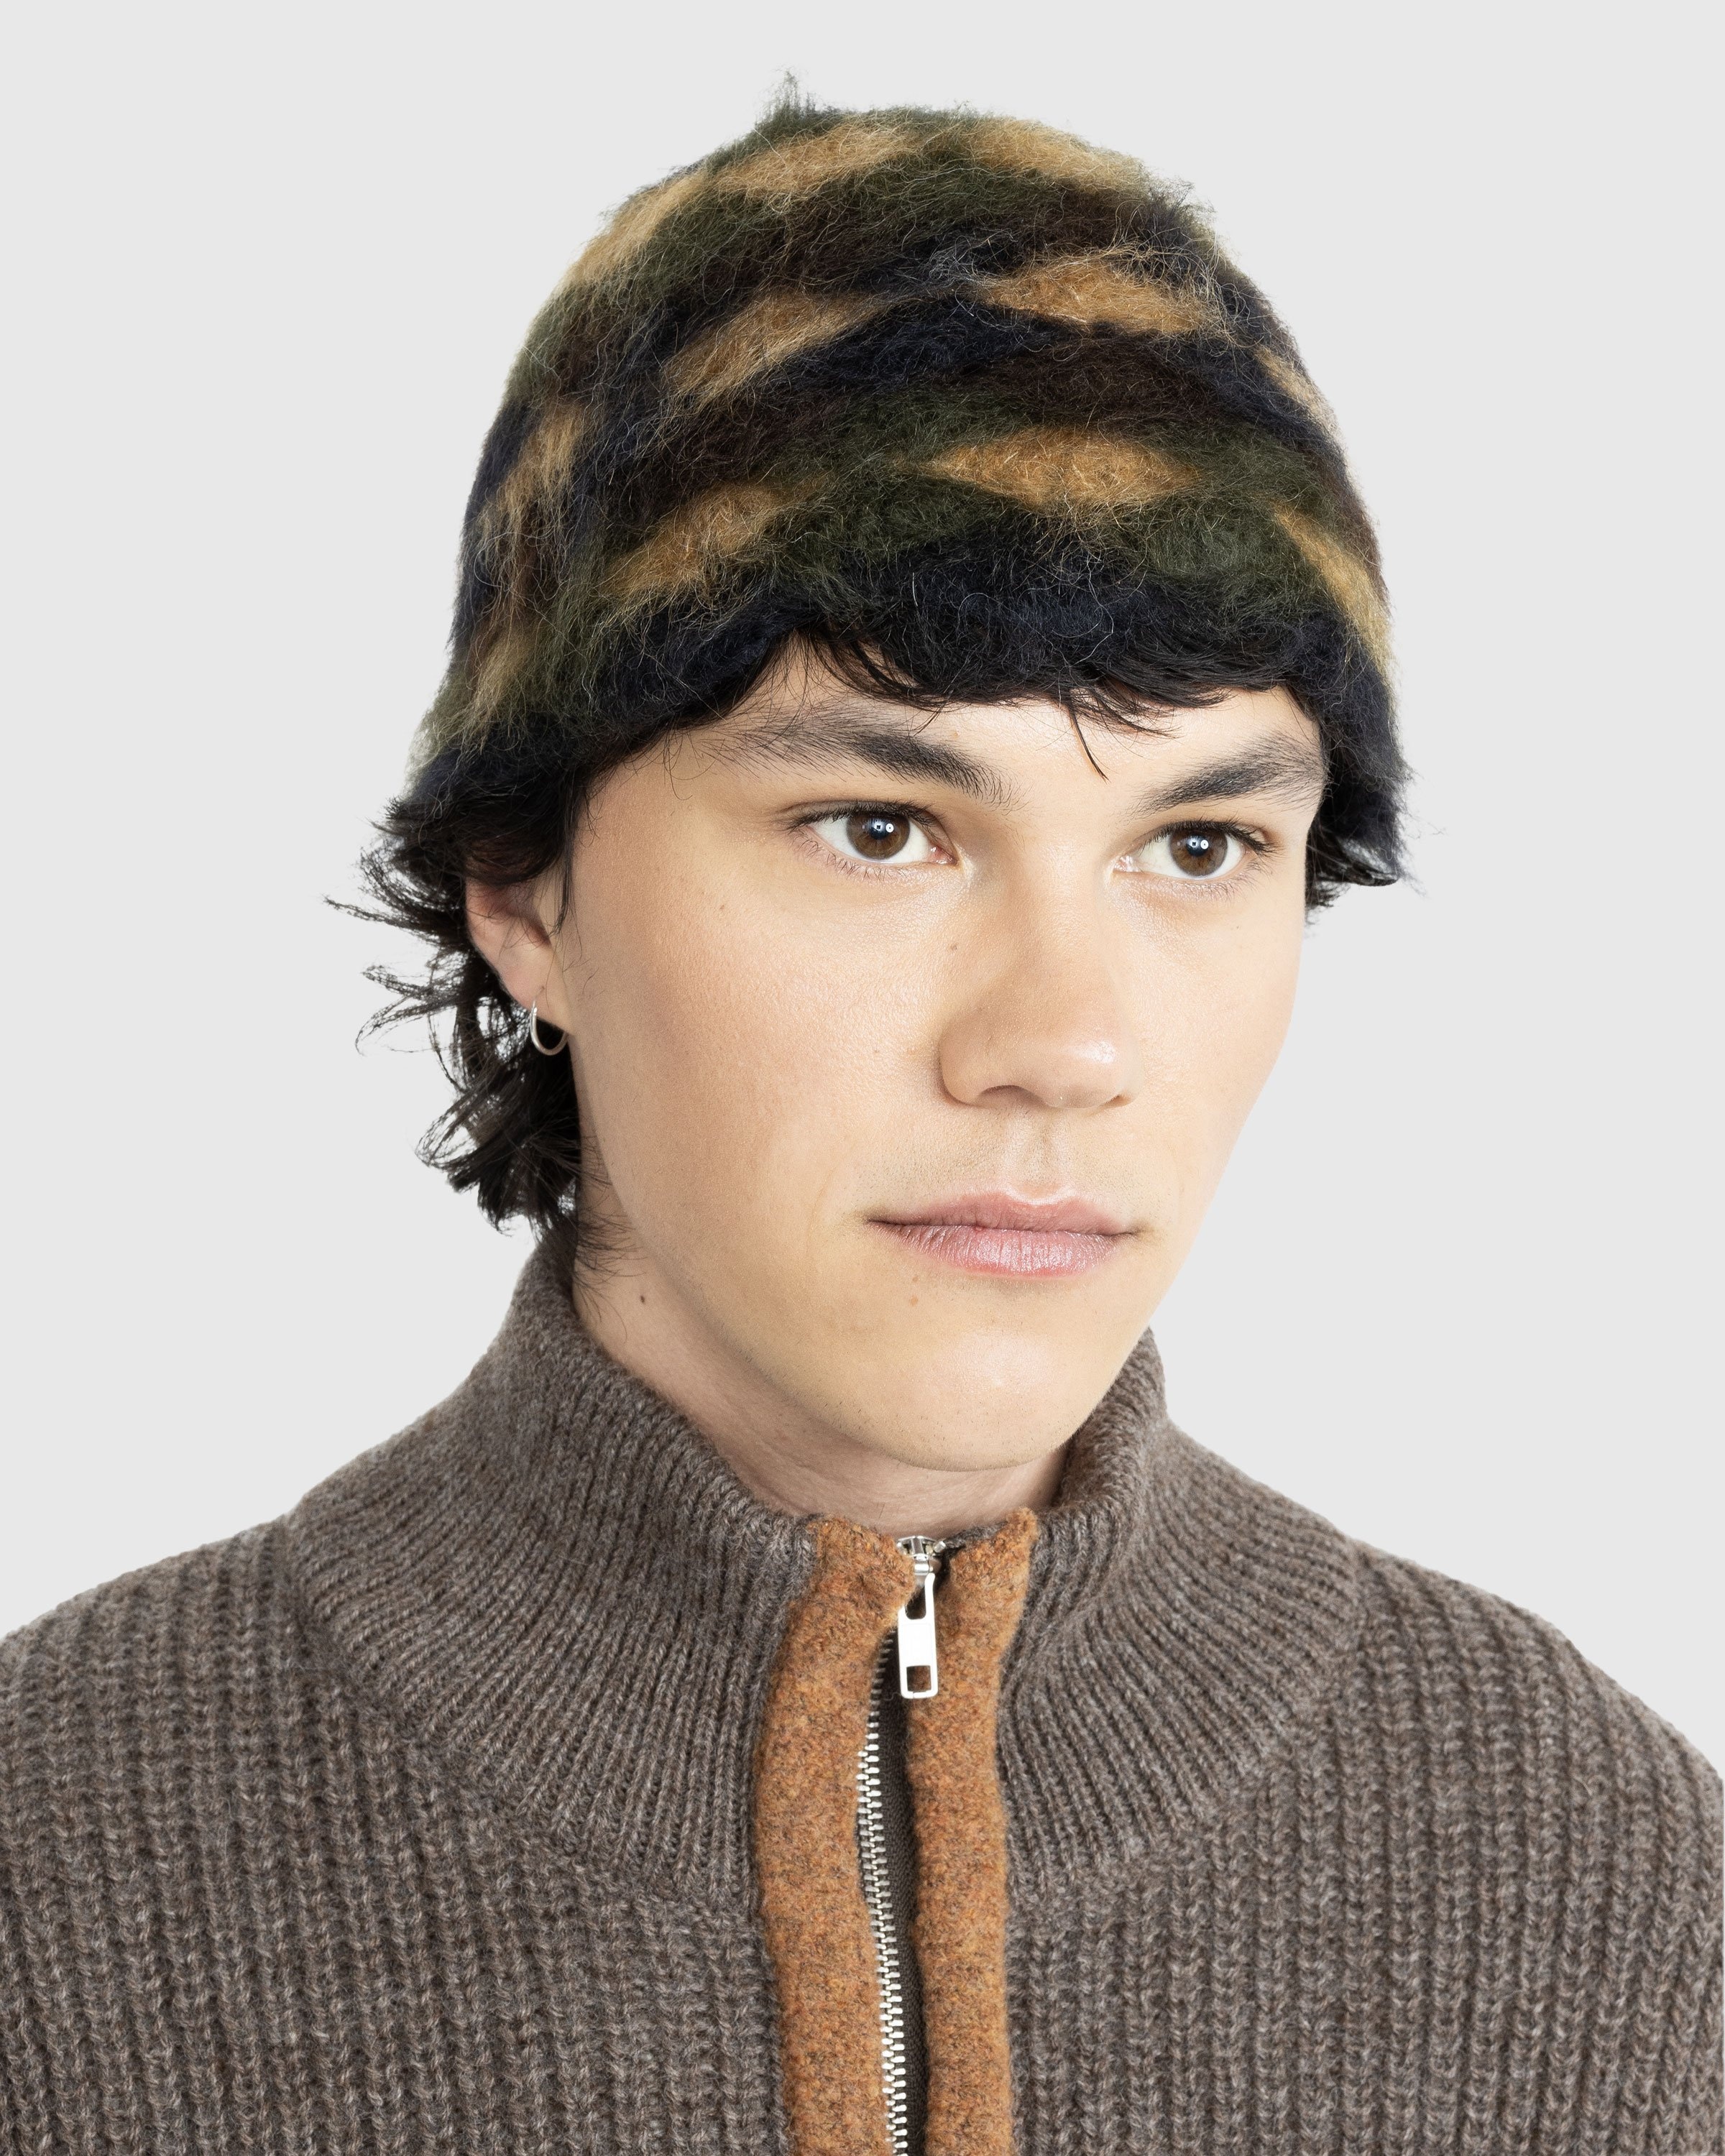 SSU – Brushed Mohair Seashell Bucket Hat Forest Camo - Hats - Green - Image 2